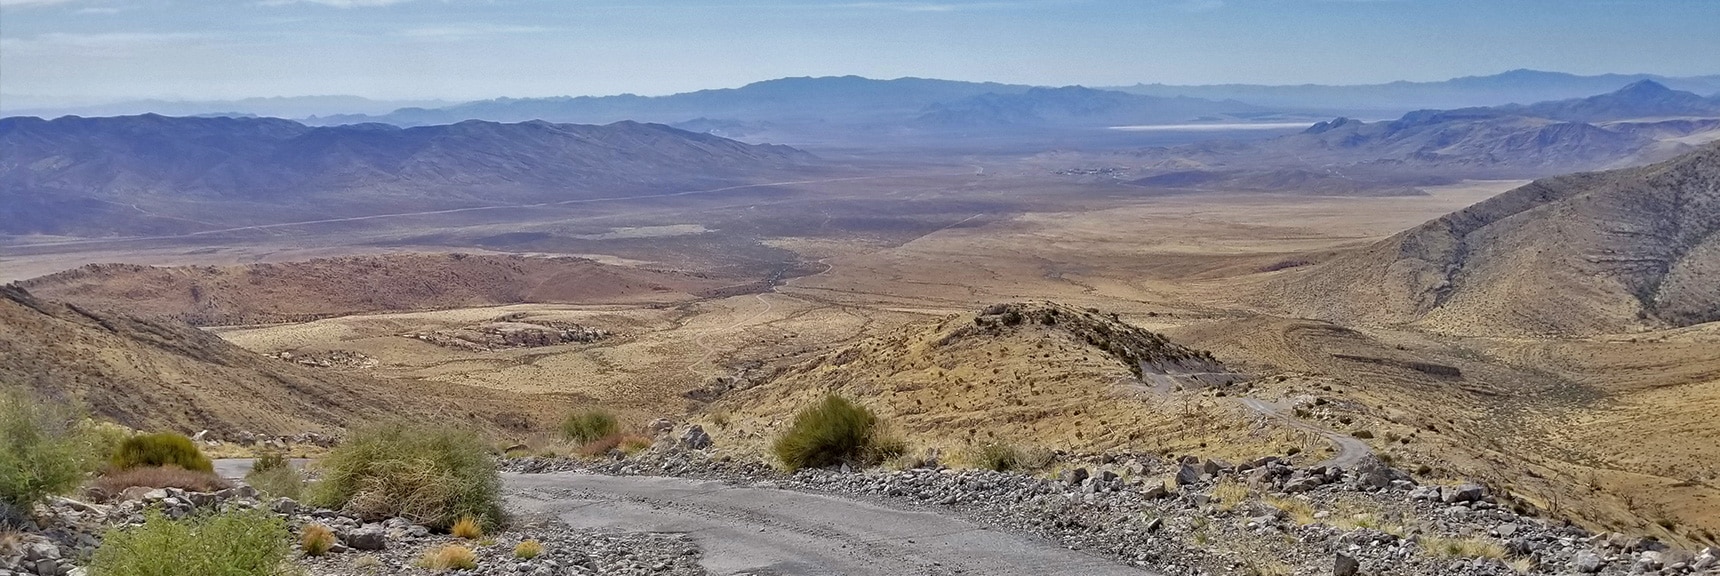 Rapid Ascent Reveals Expanding Panorama of Valley and Mountains Below | Potosi Mountain Spring Mountains Nevada